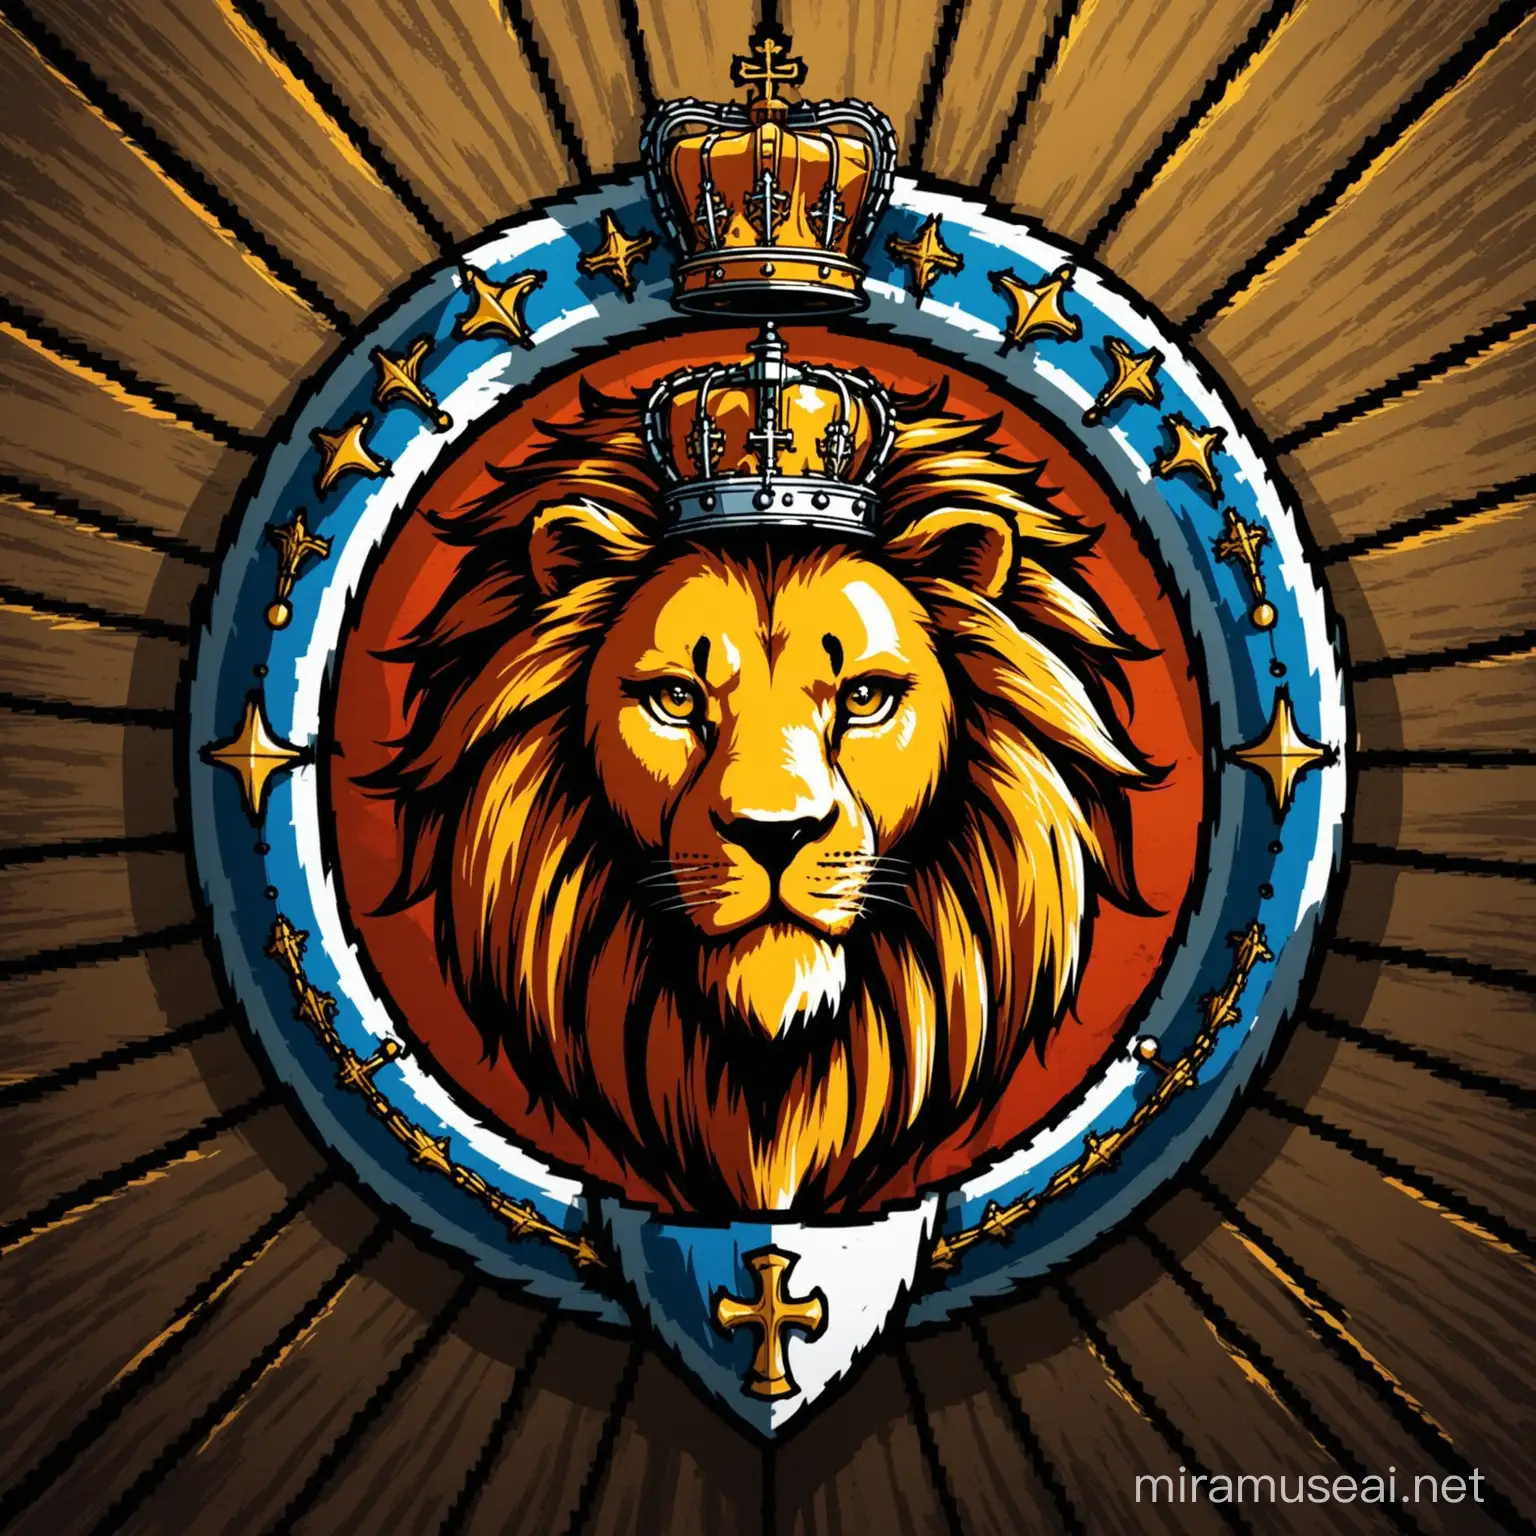 Twitter profile picture. Theme is cyber security. Should include Christian aspect, as well as Scottish (maybe a lion rampant?) Be creative